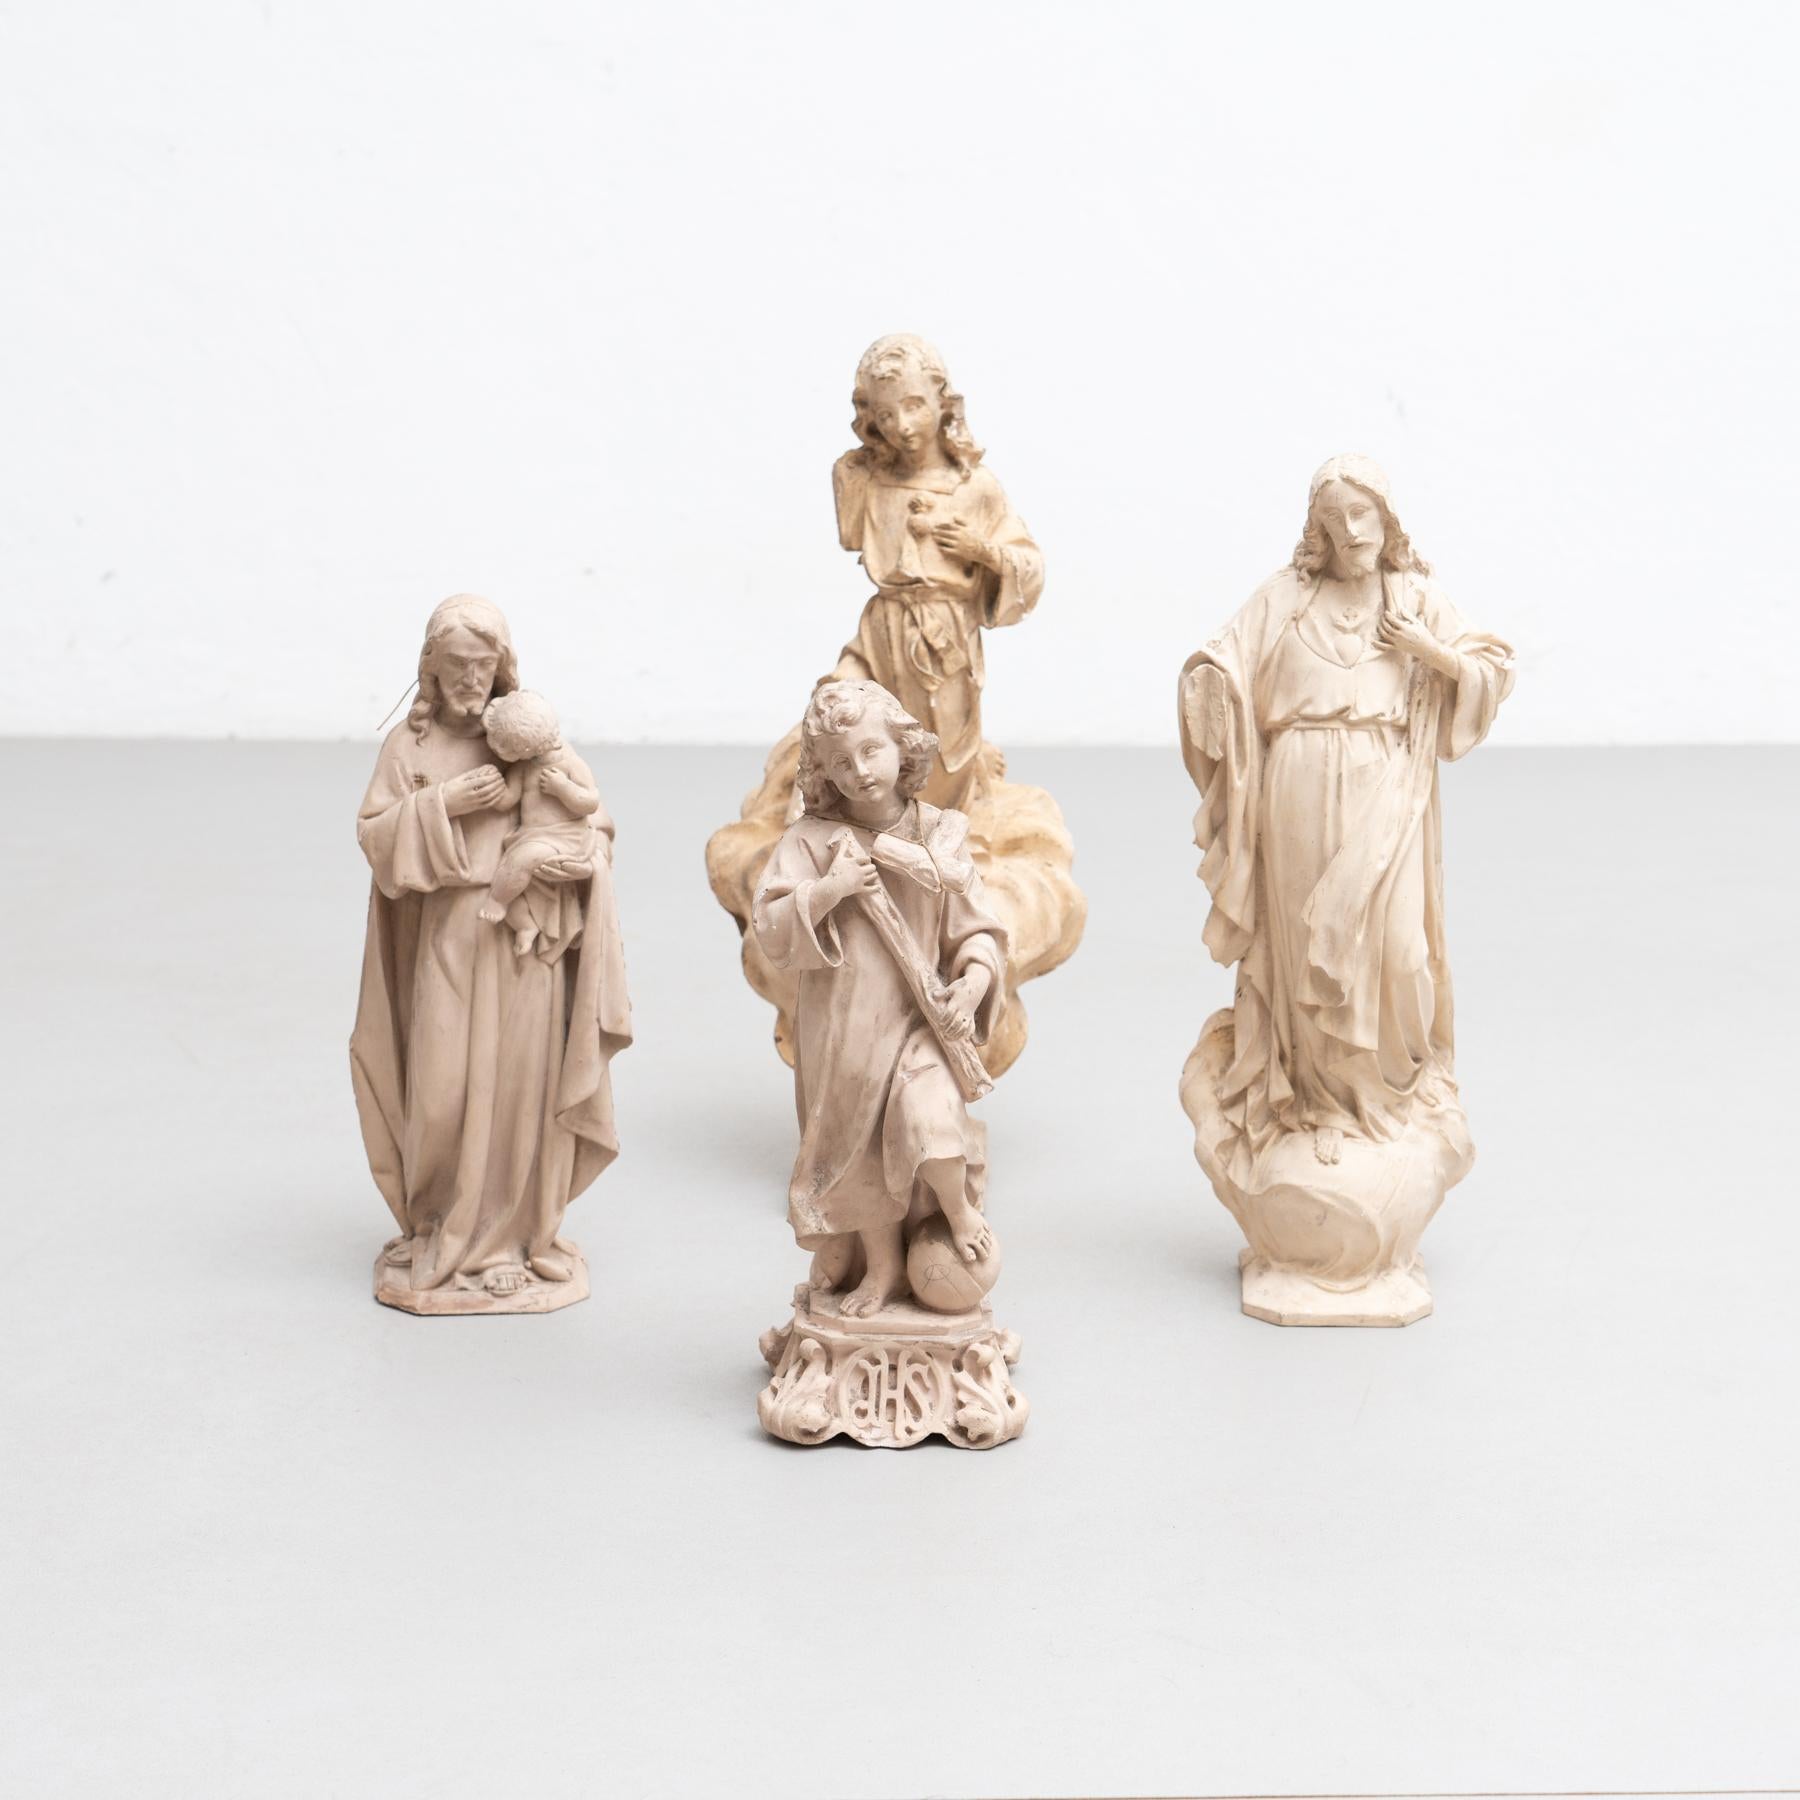 Set of 4 traditional religious plaster figures.

Made in traditional Catalan atelier in Olot, Spain, circa 1950.

In original condition, with minor wear consistent with age and use, preserving a beautiful patina.

Olot has a long tradition in the